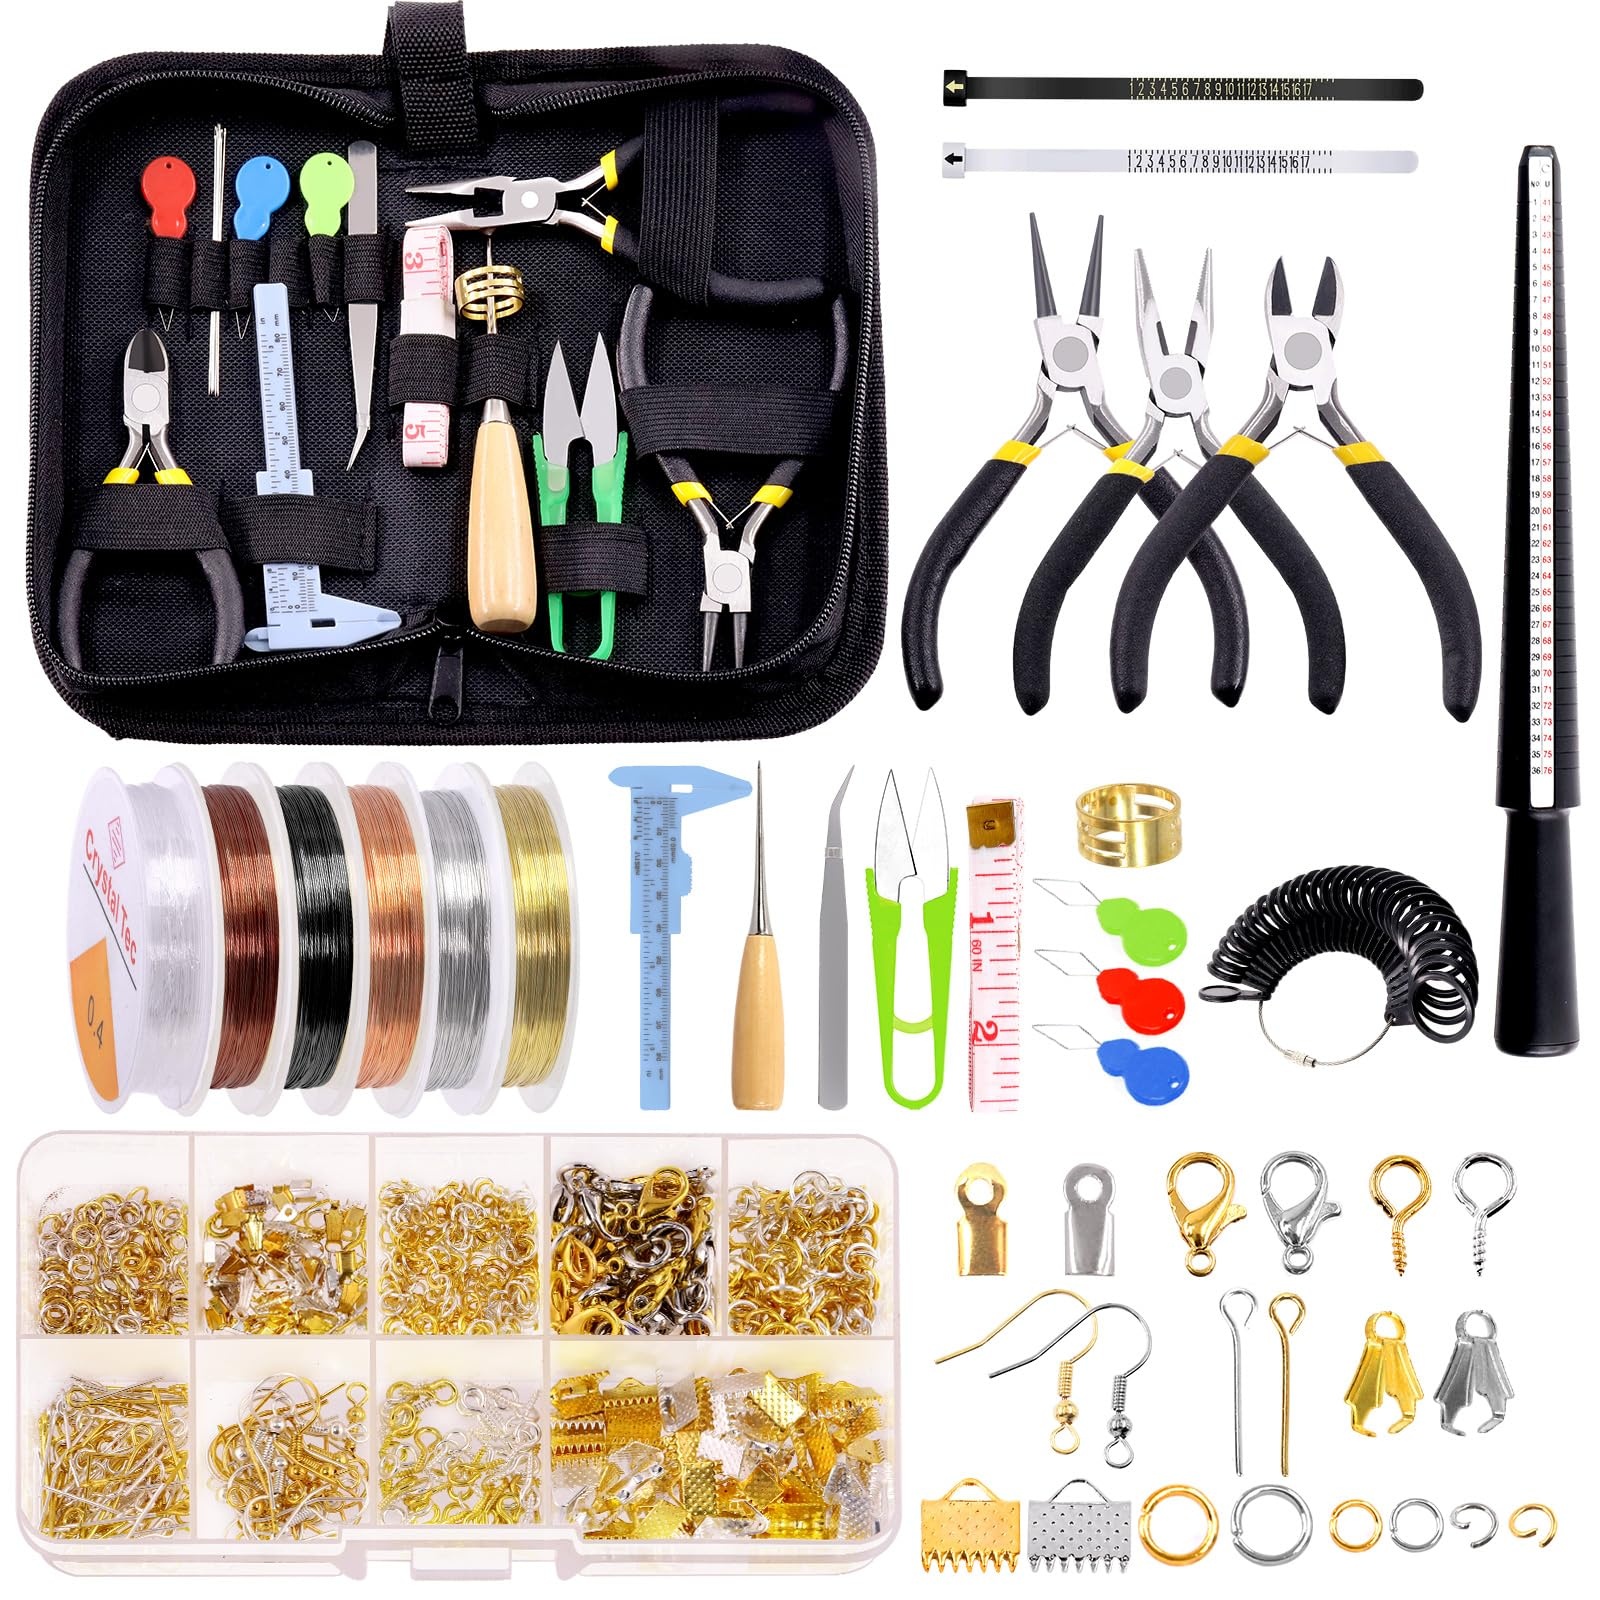 Glarks 950Pcs Jewelry Making Supplies Kit with Jewelry Making Tools, Jewelry Pliers, Beading Wires, Jewelry Findings and Measuring Tools for DIY Earring Necklace Craft Jewelry Repair (937pcs)